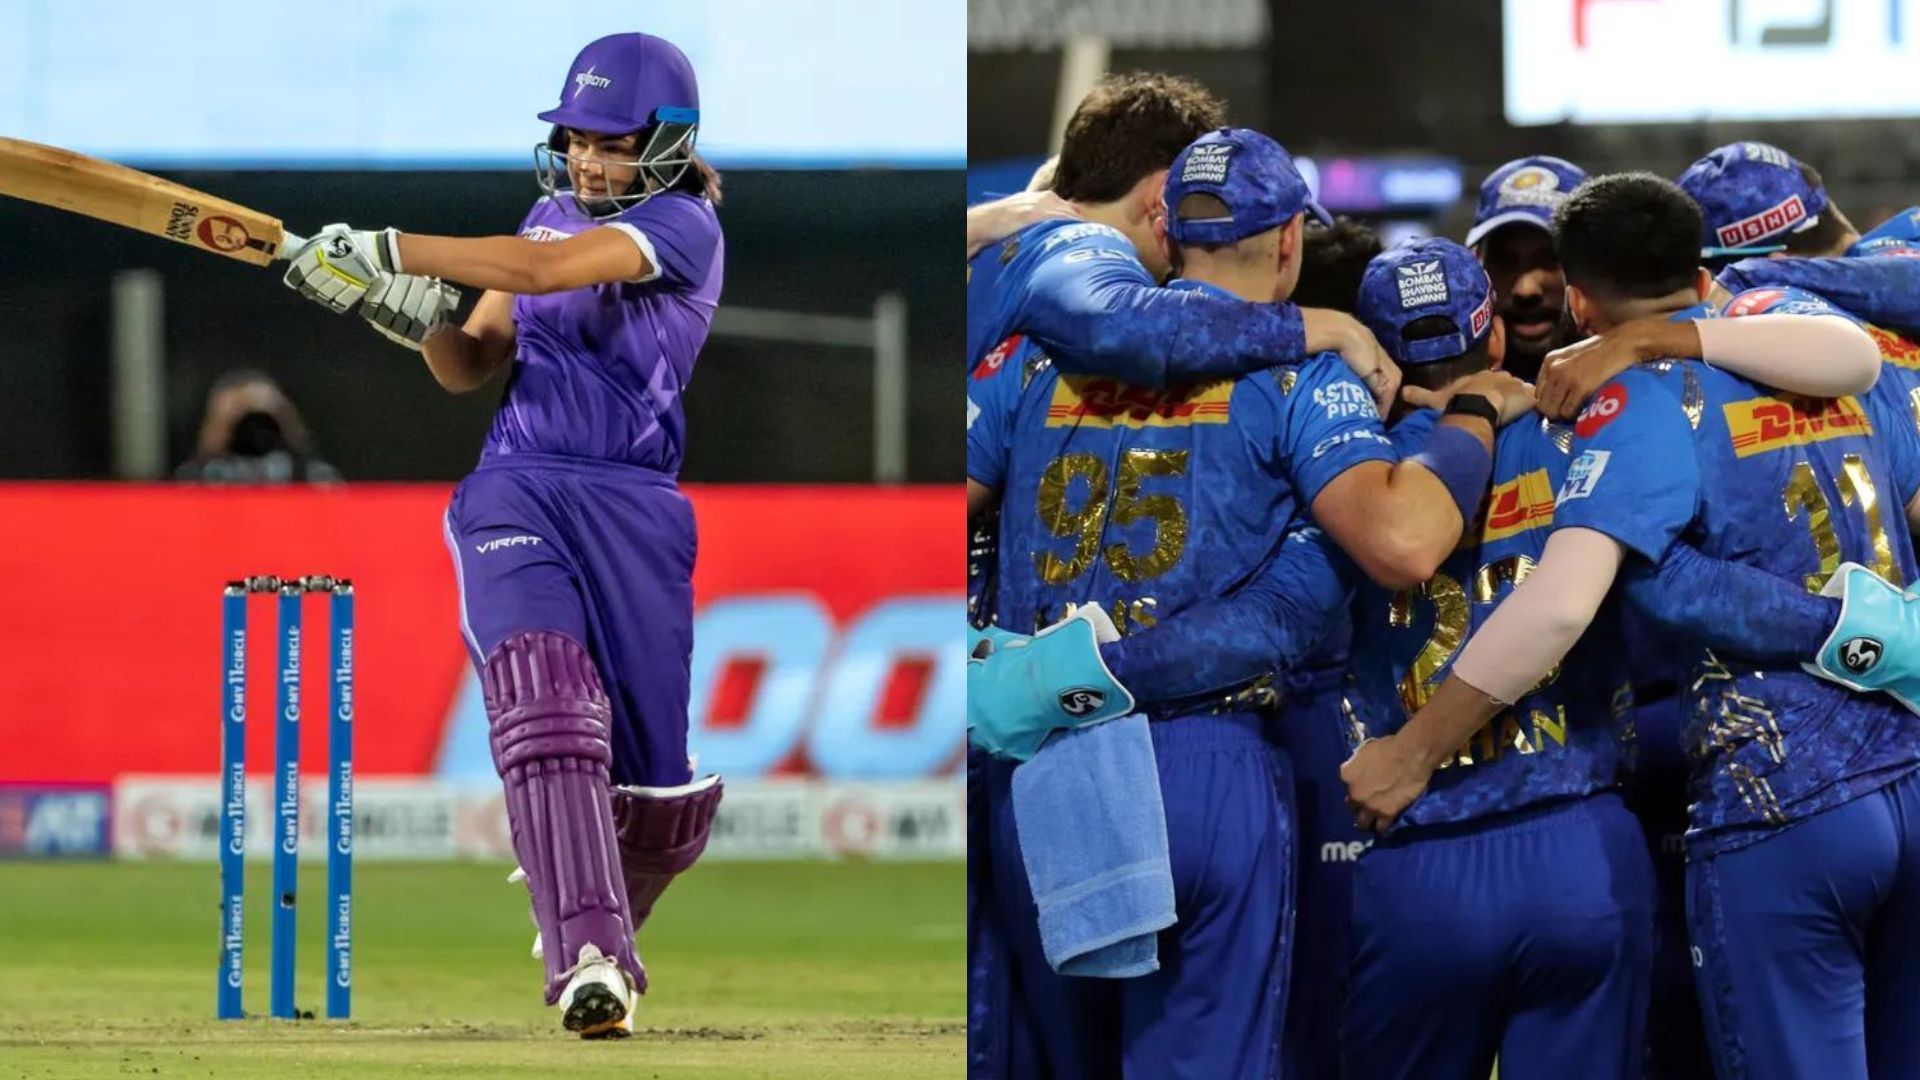 If Mumbai Indians make a WIPL team, Yastika Bhatia (L) would love to feature in it. (P.C.: iplt20.com)